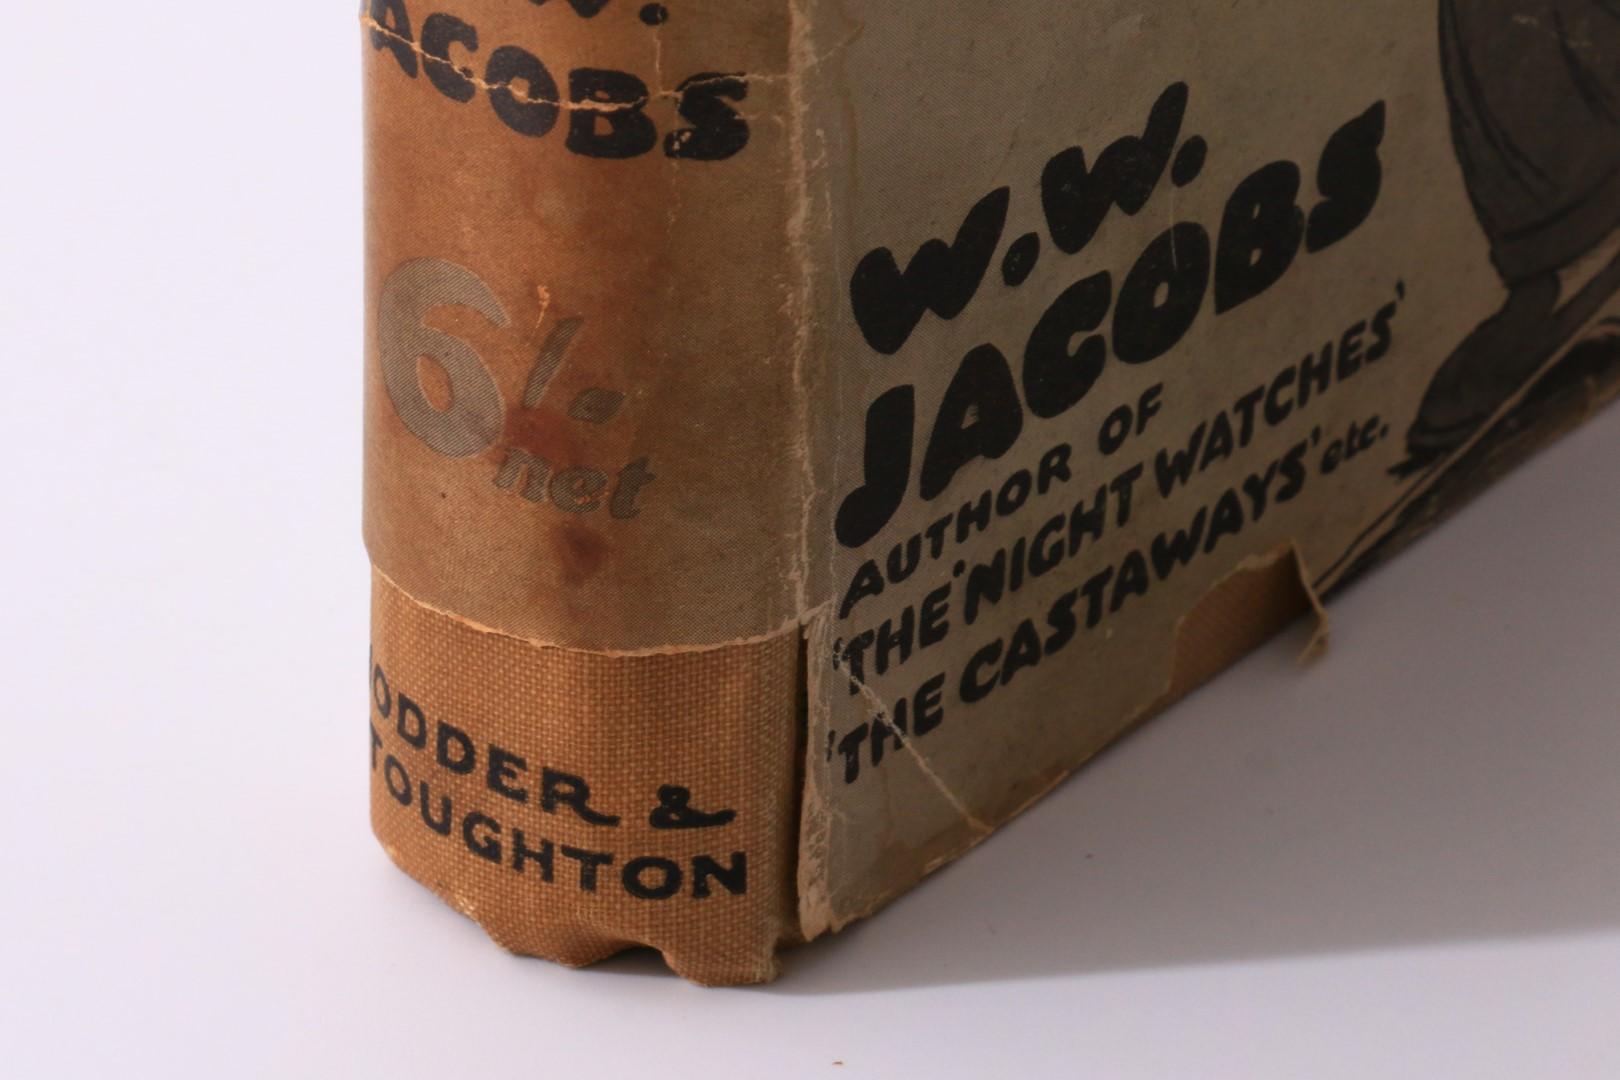 W.W. Jacobs - Deep Waters with Additional Illustration - Hodder & Stoughton, 1919, First Edition.